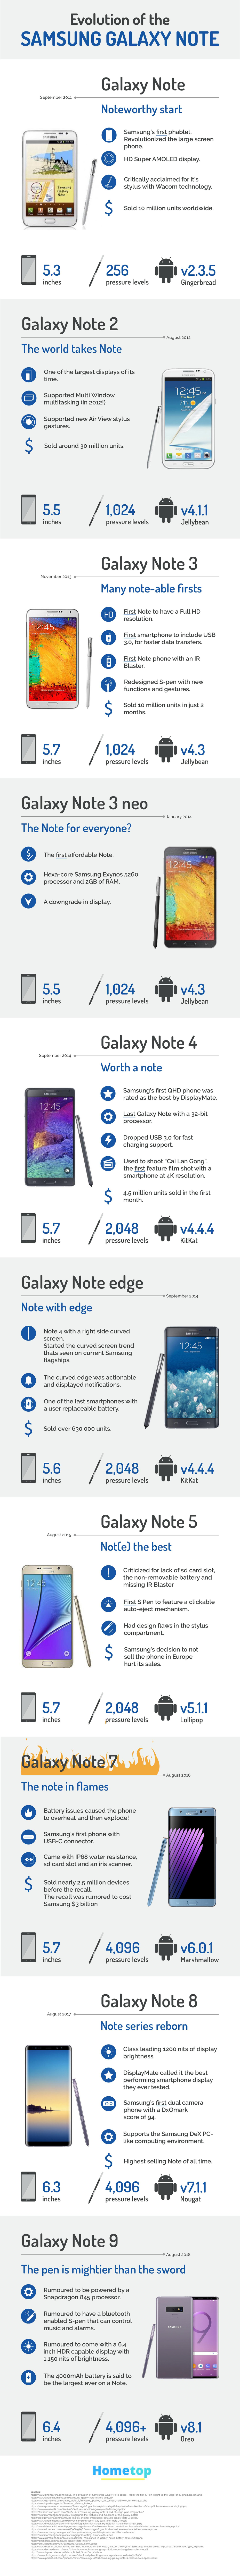 The Evolution of the Samsung Galaxy Note